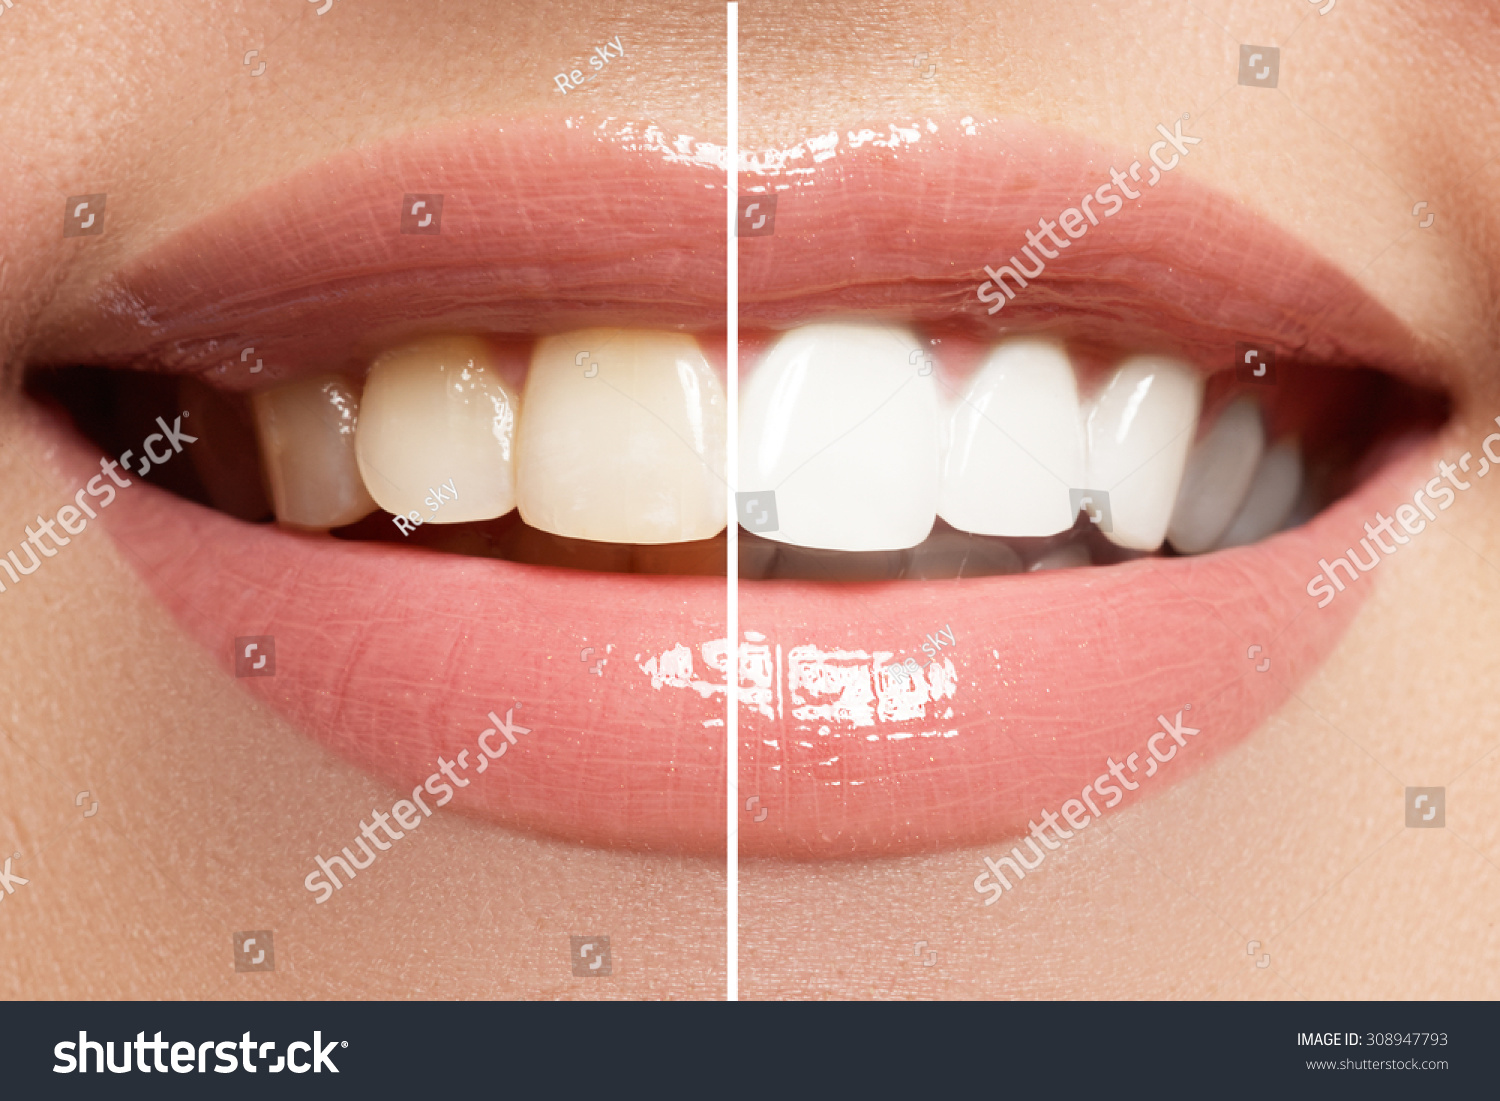 Perfect smile before and after bleaching. Dental care and whitening teeth #308947793